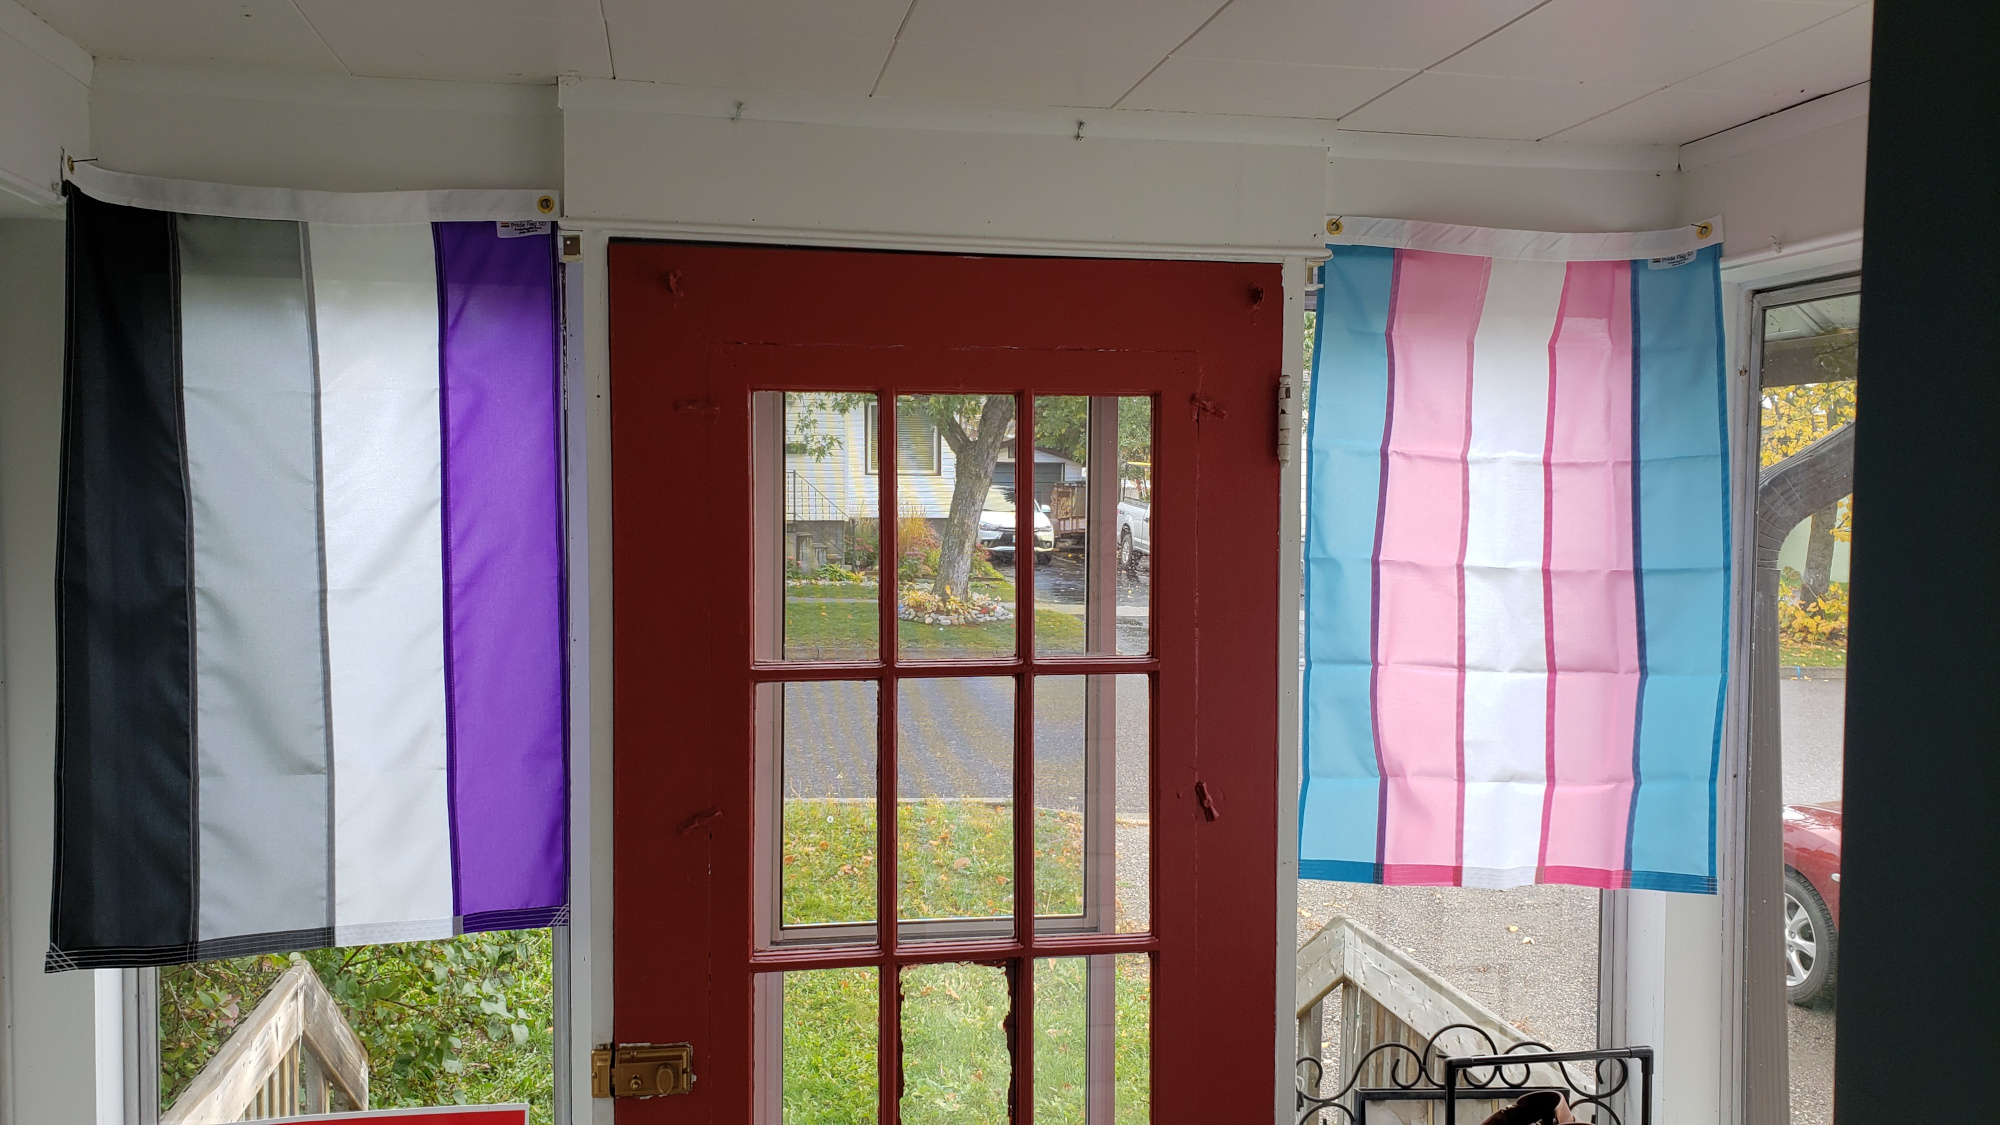 Photo of my front door from inside the front porch. The door is red. On either side hangs a pride flag: the asexual pride flag on the left, and the trans pride flag on the right.